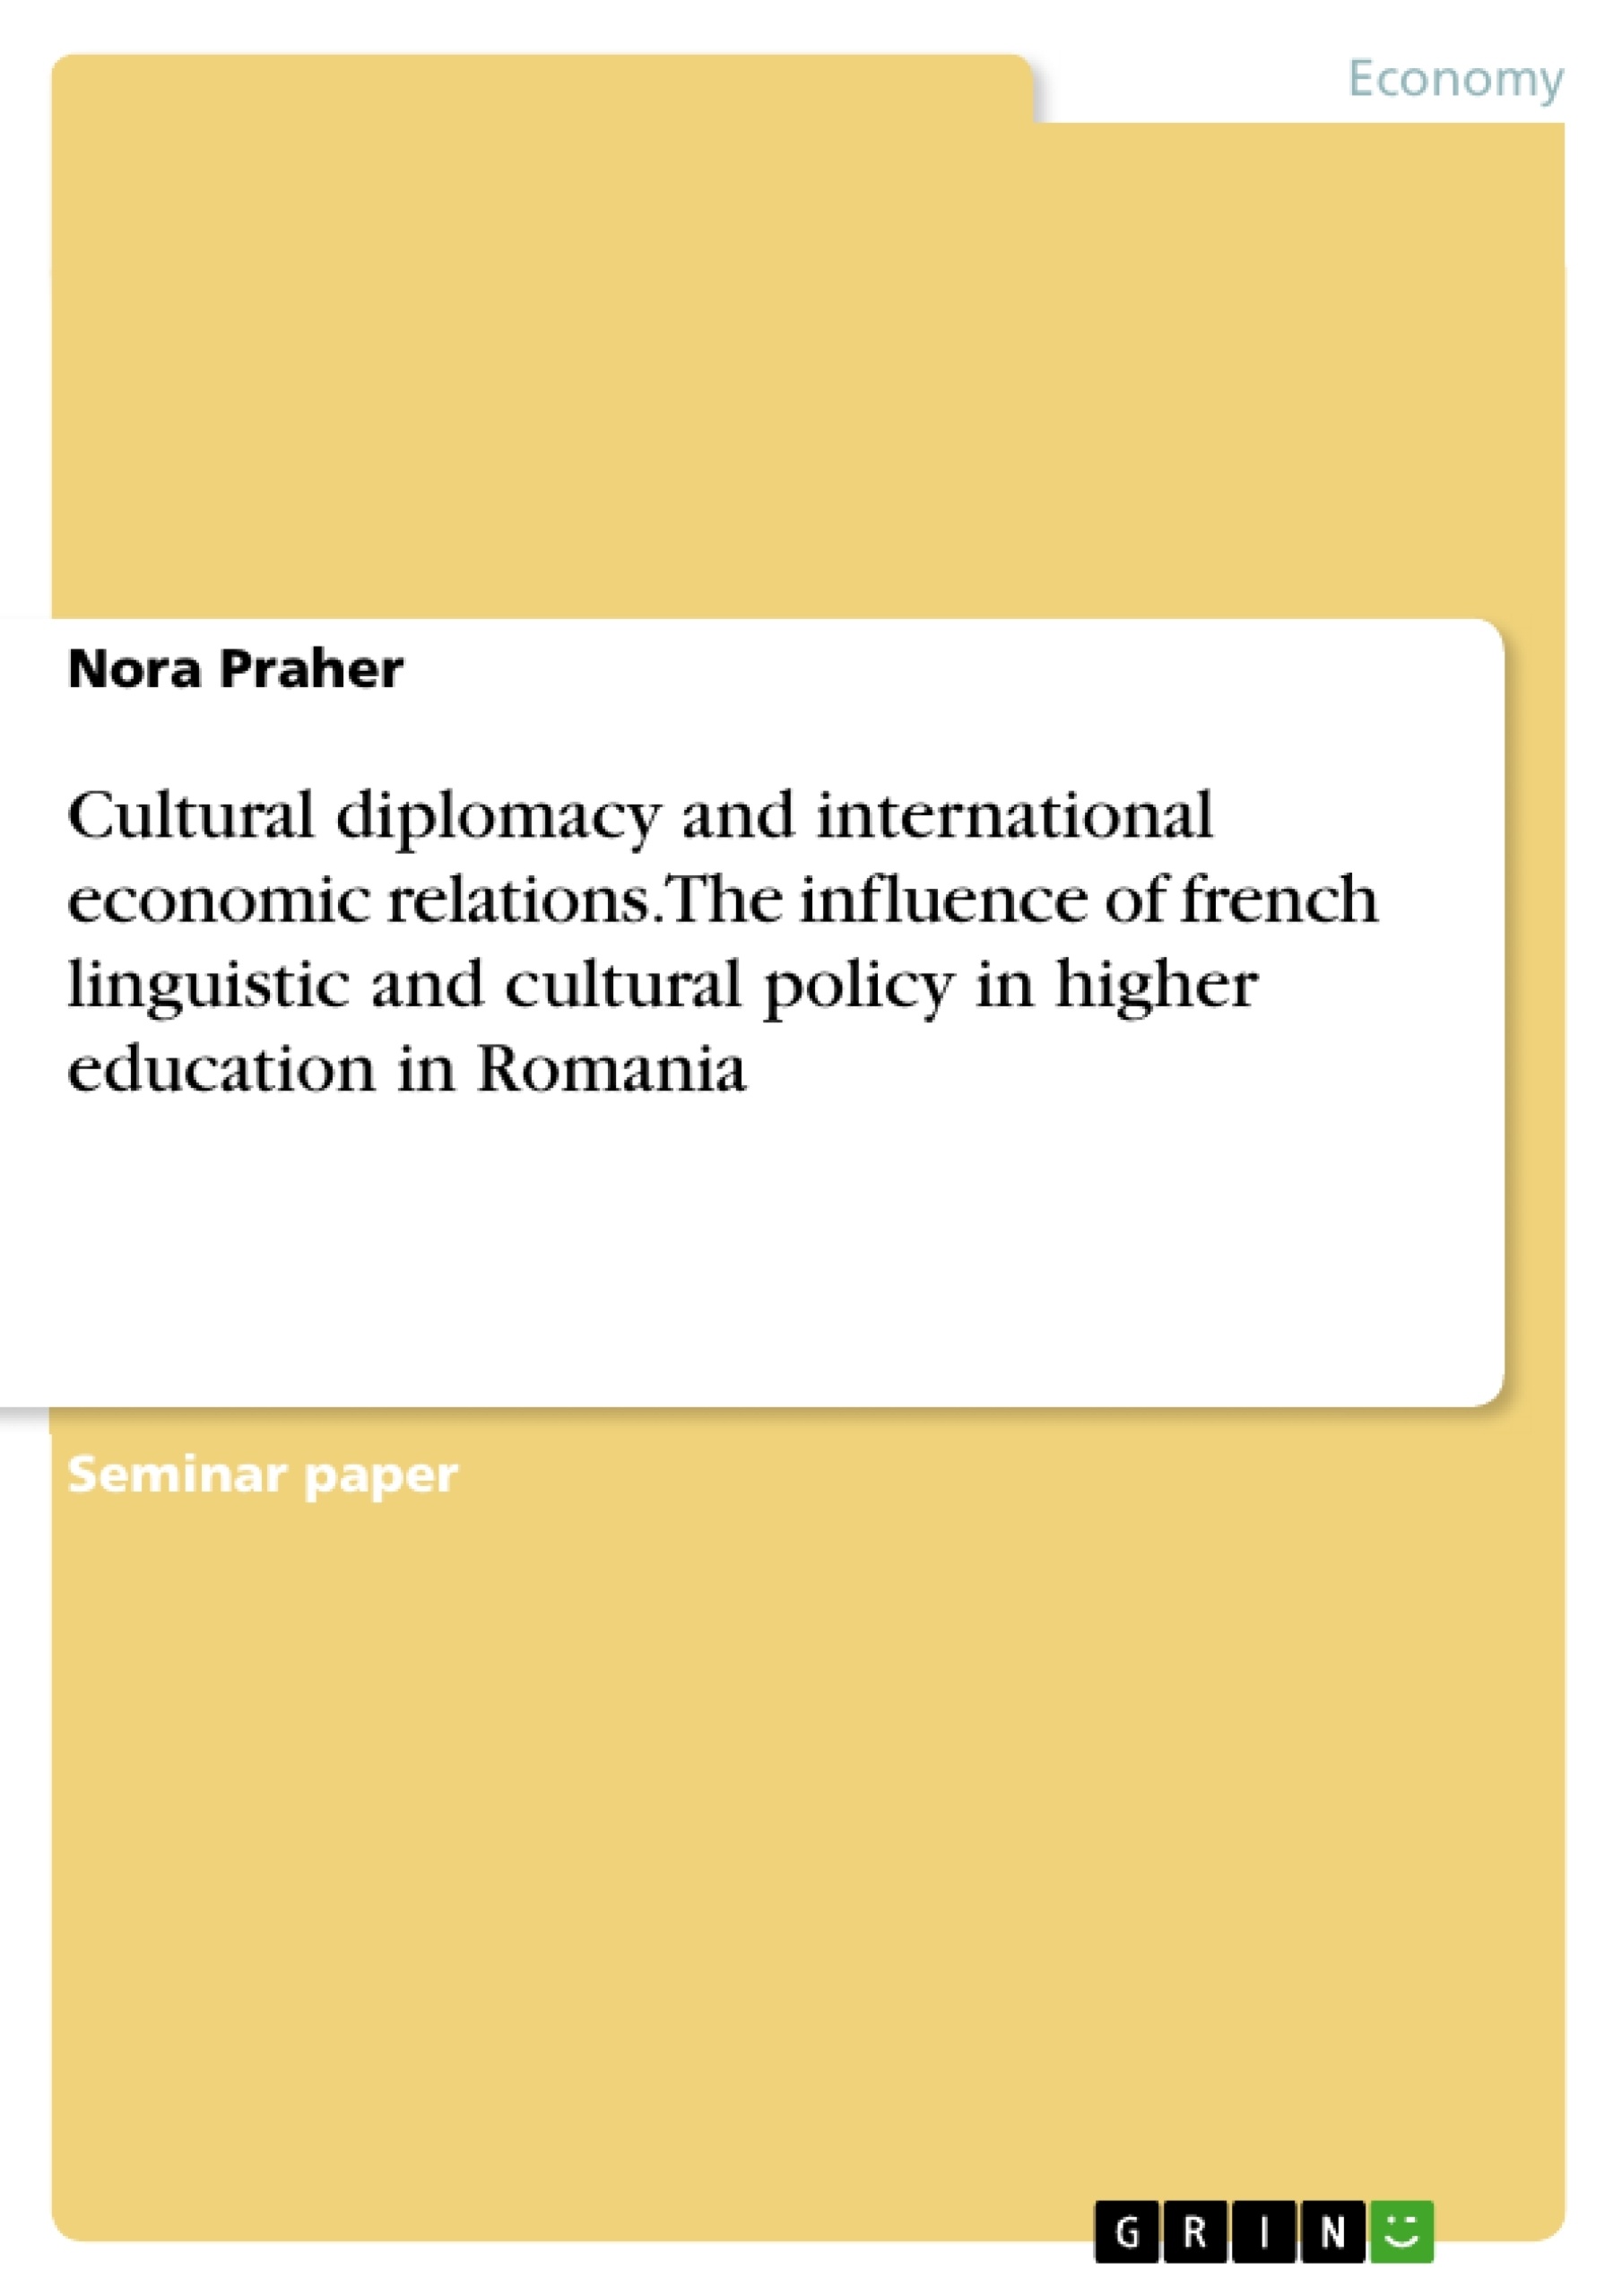 Title: Cultural diplomacy and international economic relations. The influence of french linguistic and cultural policy in higher education in Romania